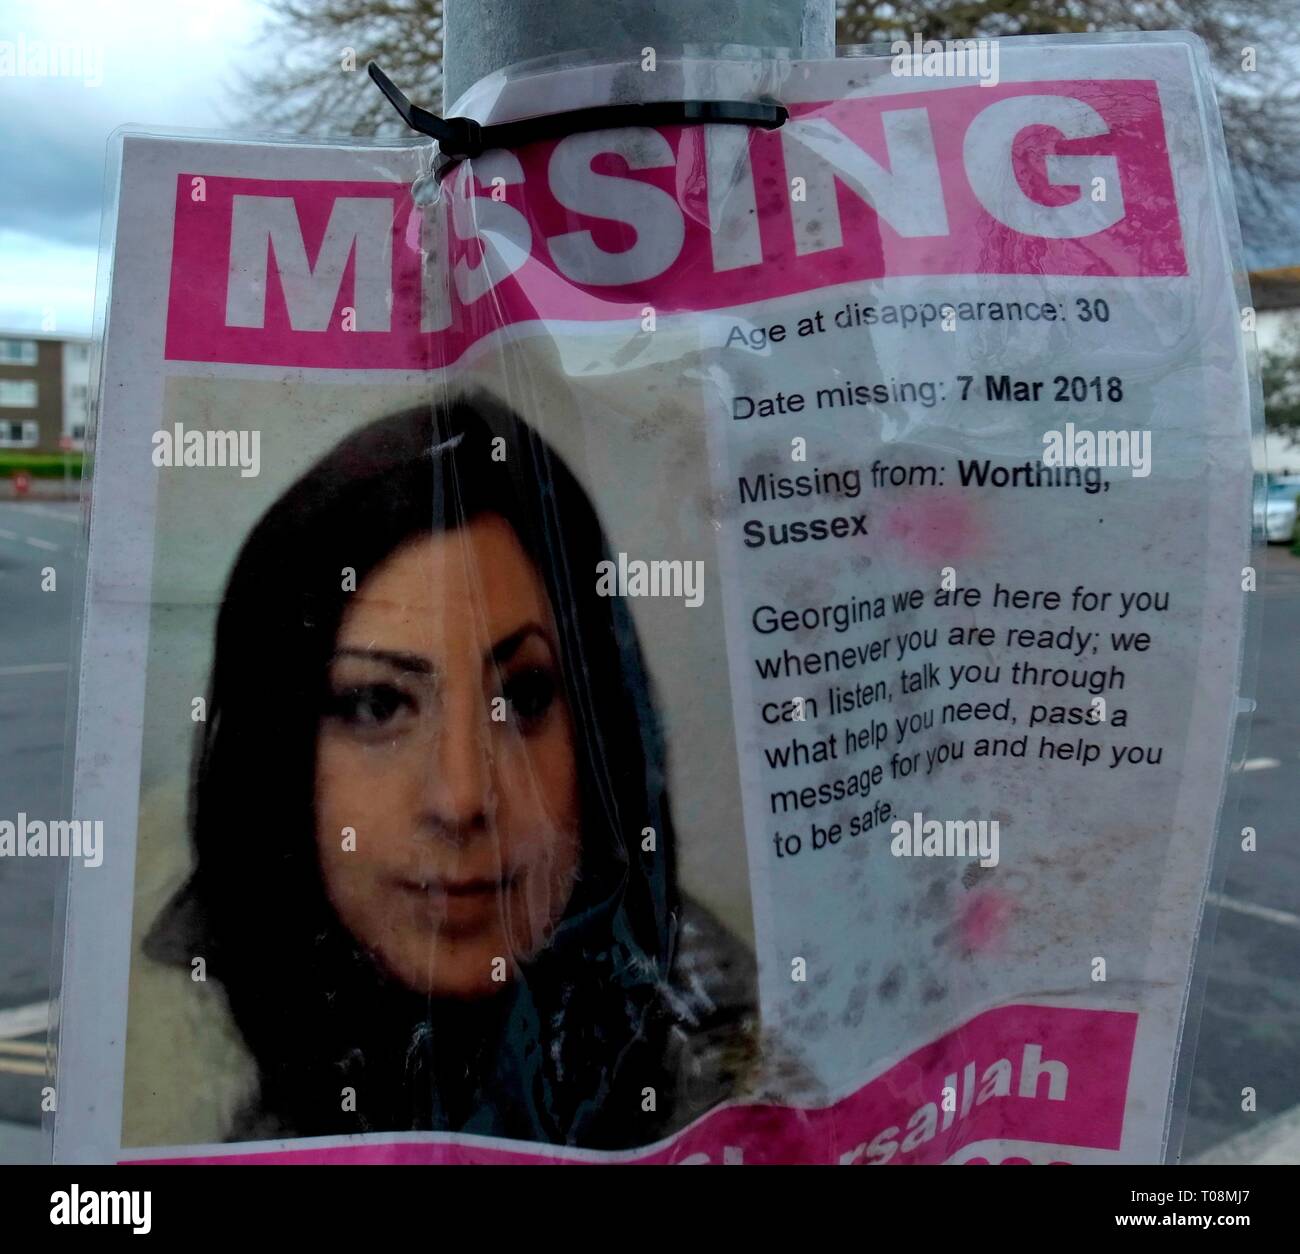 AJAXNETPHOTO. 2018. WORTHING, WEST SUSSESX, ENGLAND. - MISSING PERSONS - A POSTER OR NOTICE DEPICTING IMAGE OF A PERSON REPORTED MISSING POSTED IN A PUBLIC PLACE IN THE TOWN OF WORTHING. PERSON NAMED IN THIS NOTICE; GEORGINA GHARSALLAH, REPORTED MISSING 7TH MARCH, 2018. PHOTO:JONATHAN EASTLAND/AJAX REF:GR191403 8974 Stock Photo